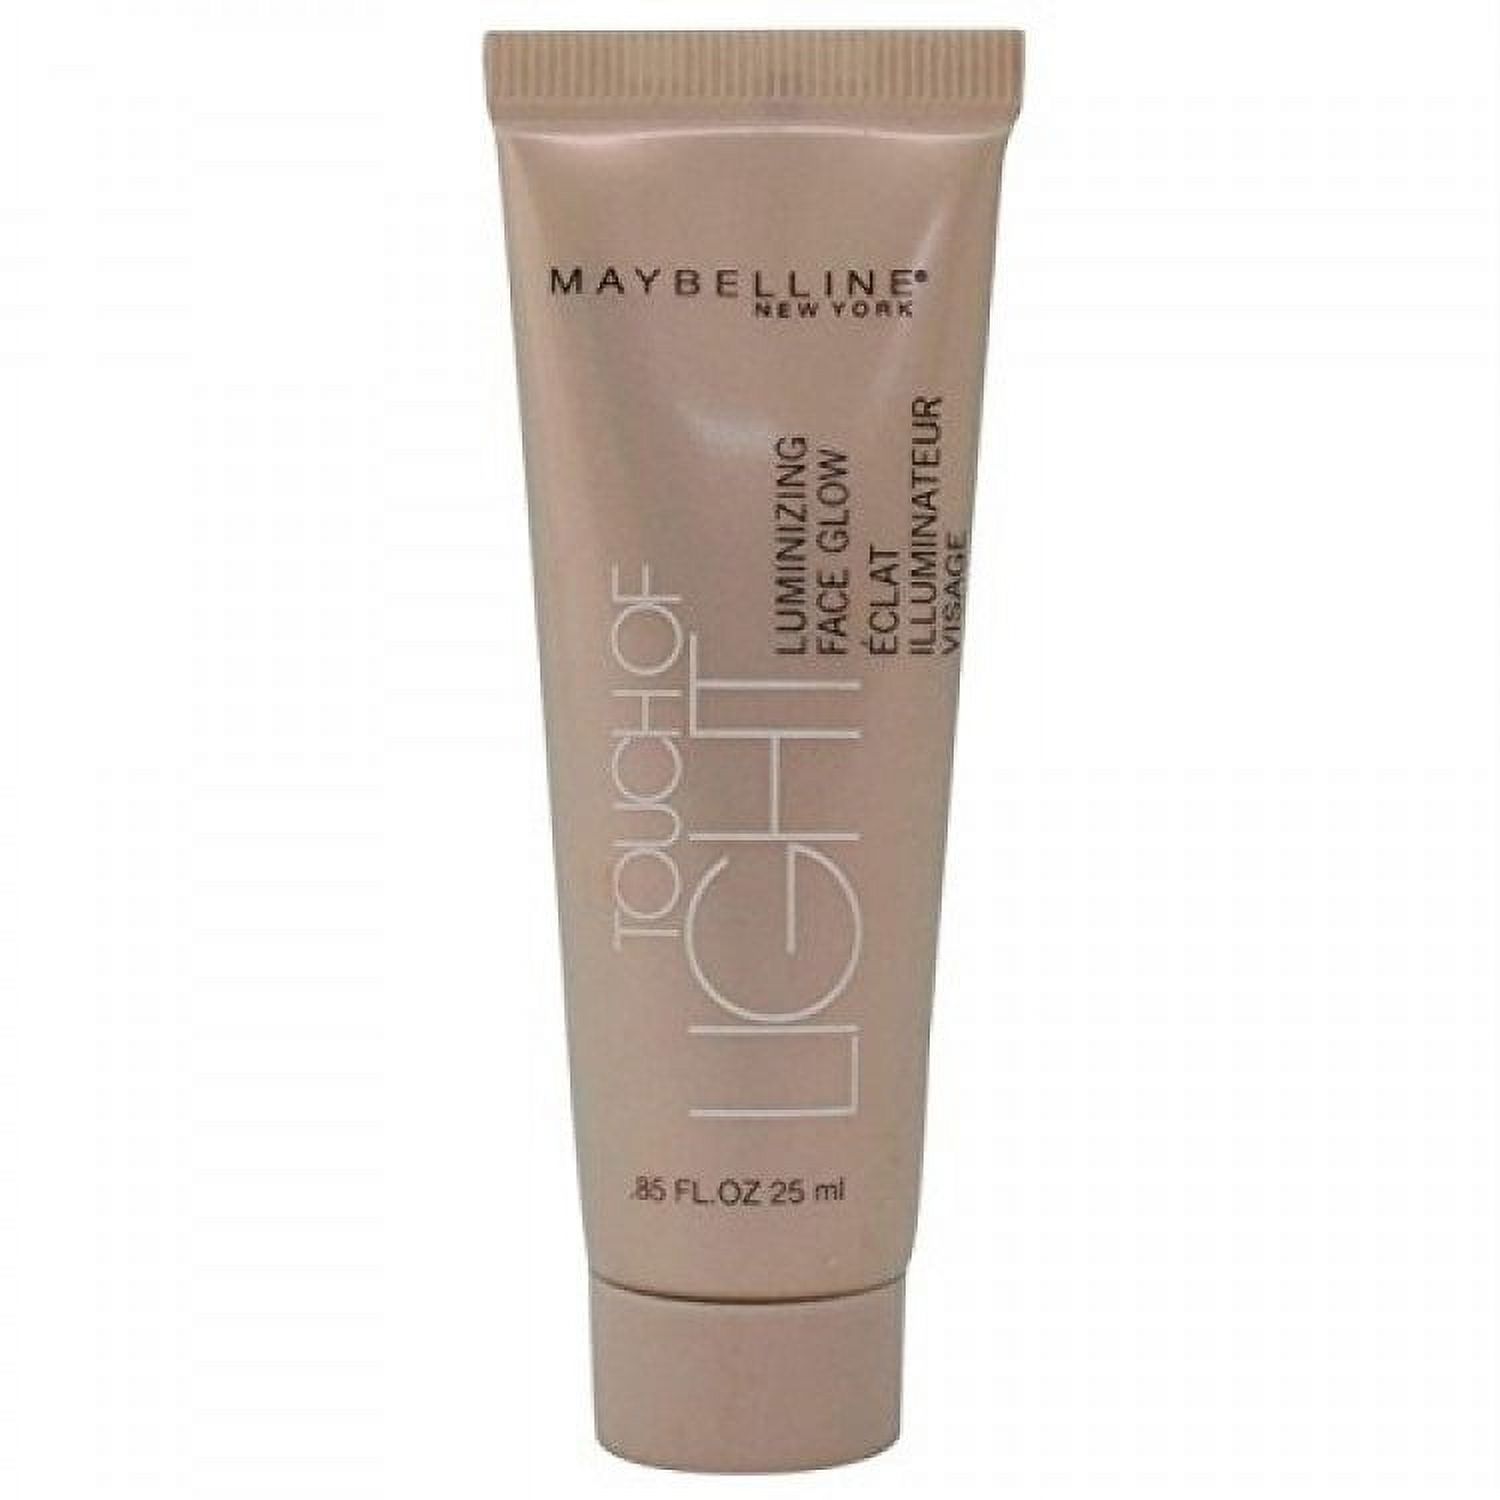 Maybelline Limited Edition Touch of Light Luminizing Face Glow .85 Fl 25 Ml + Schick Slim Twin ST for Sensitive Skin - image 1 of 2